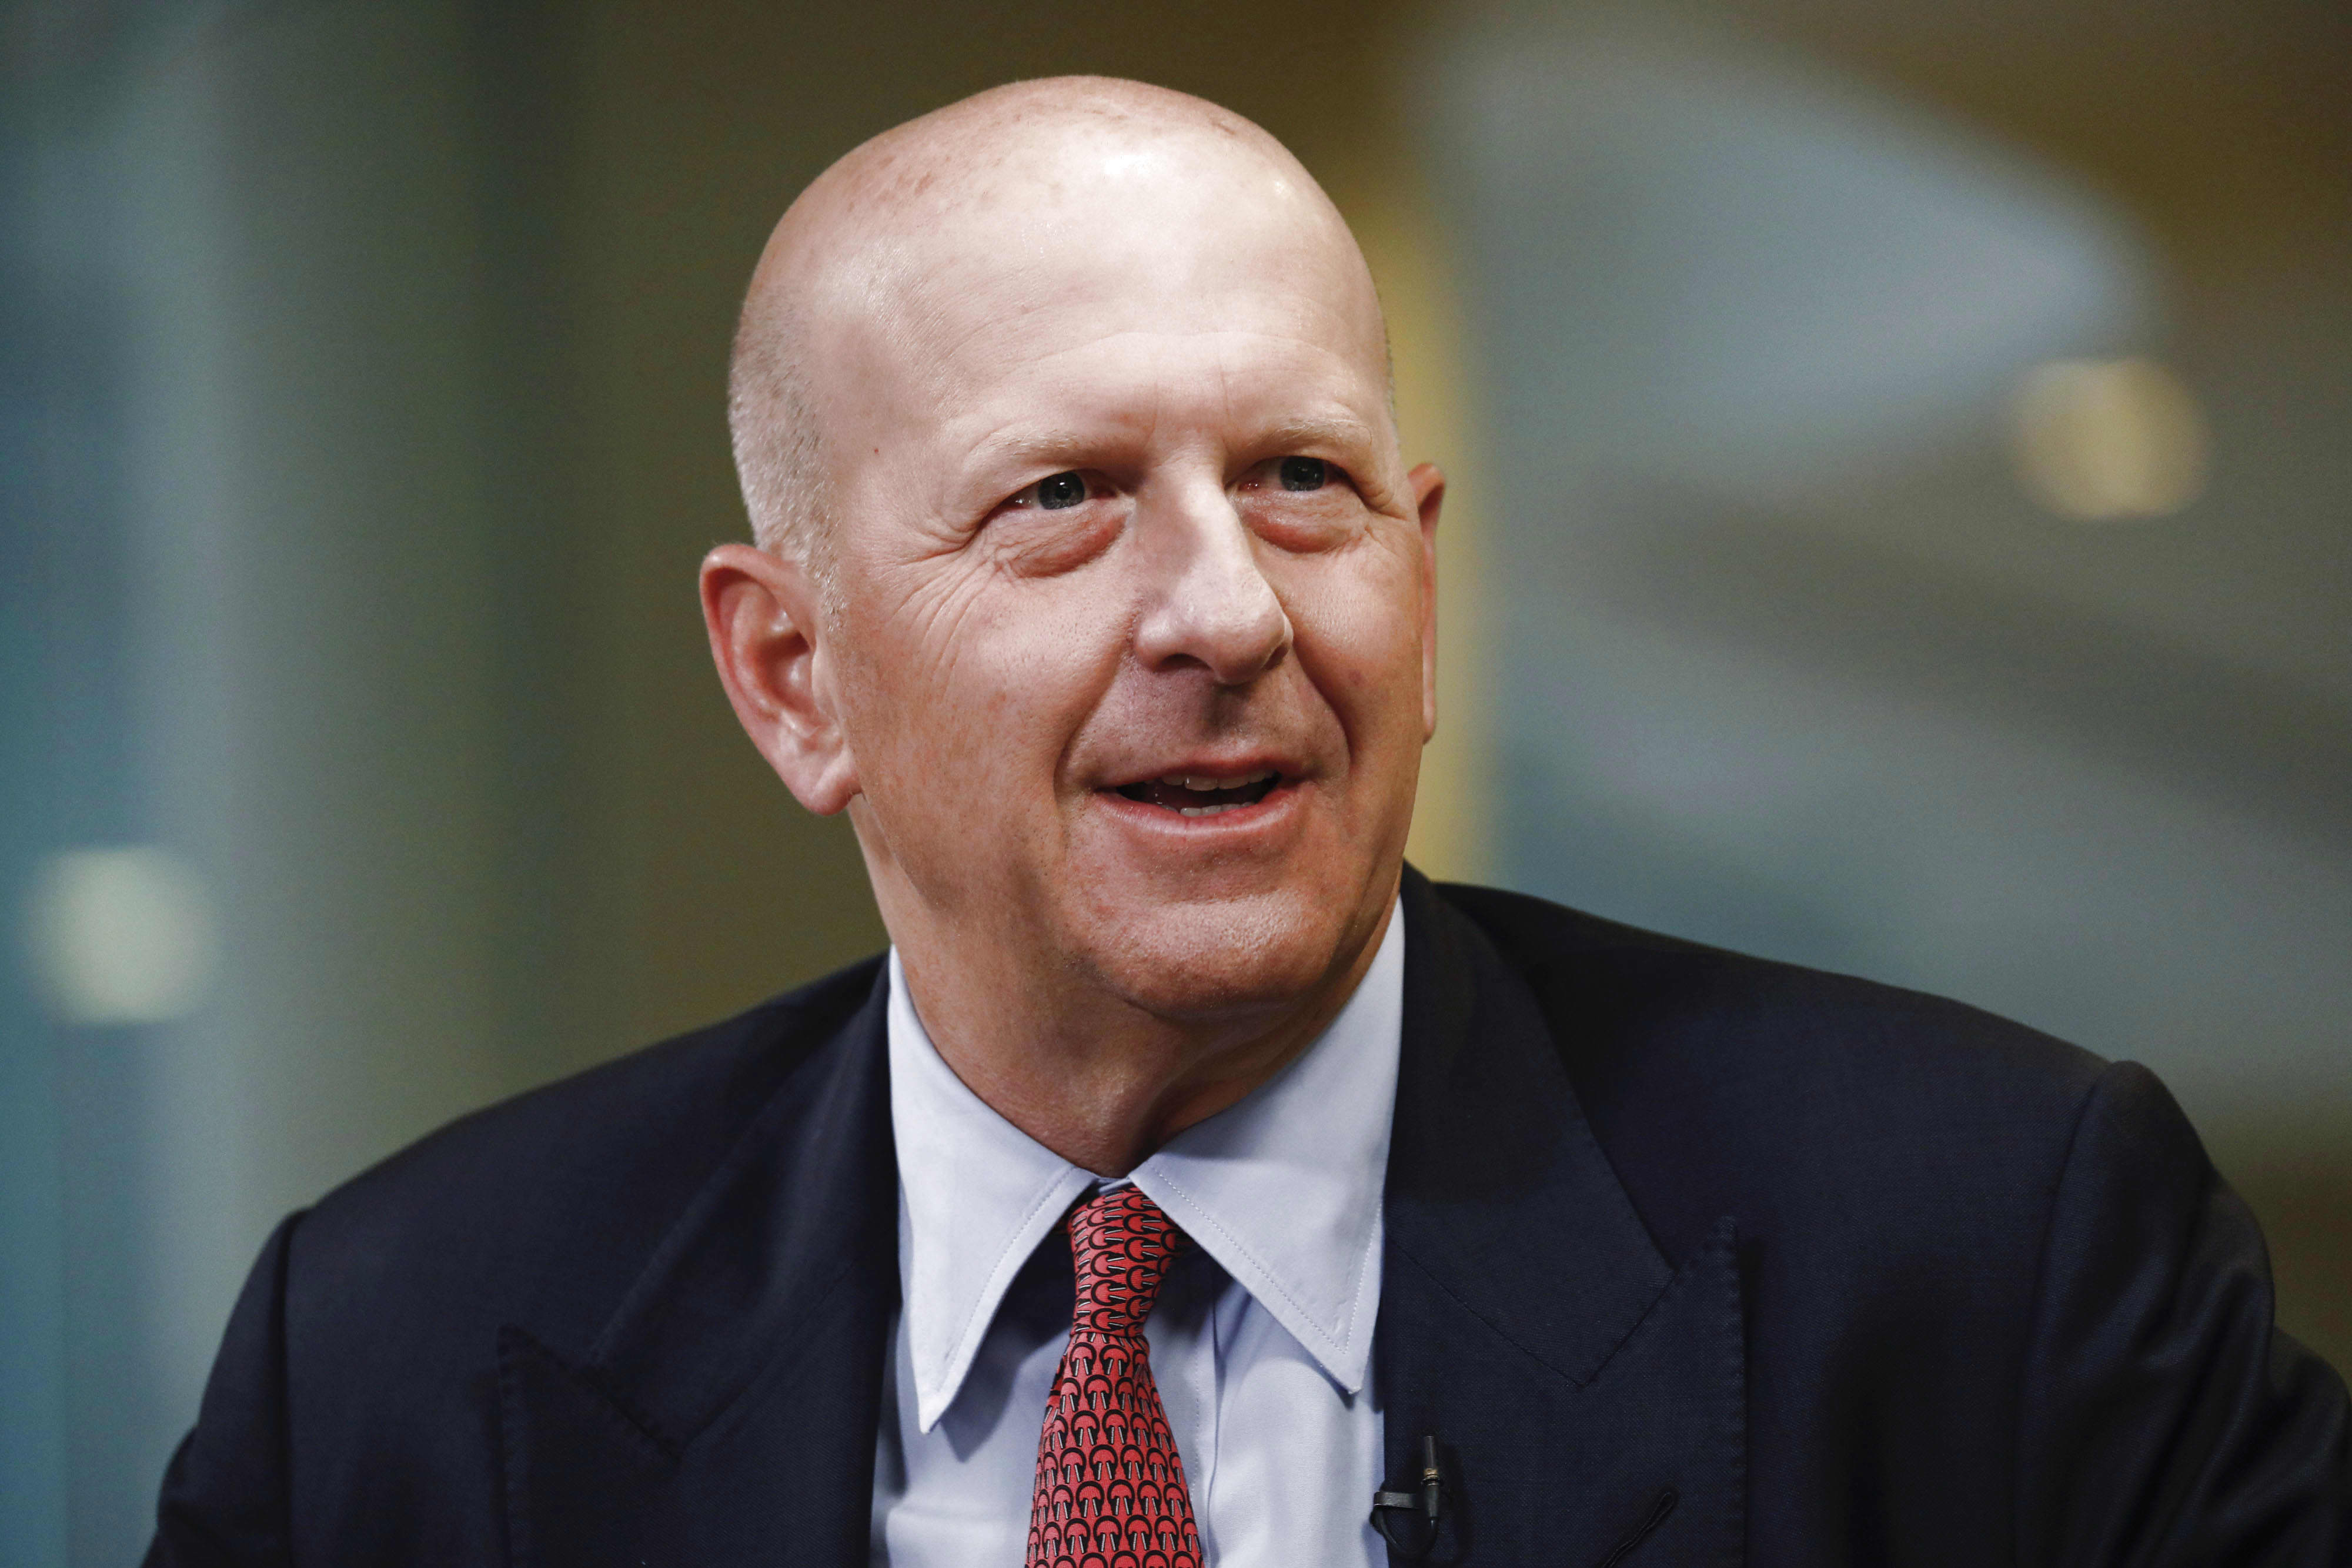 Goldman’s risk controls worked well during Archegos’ liquidation, says CEO Solomon